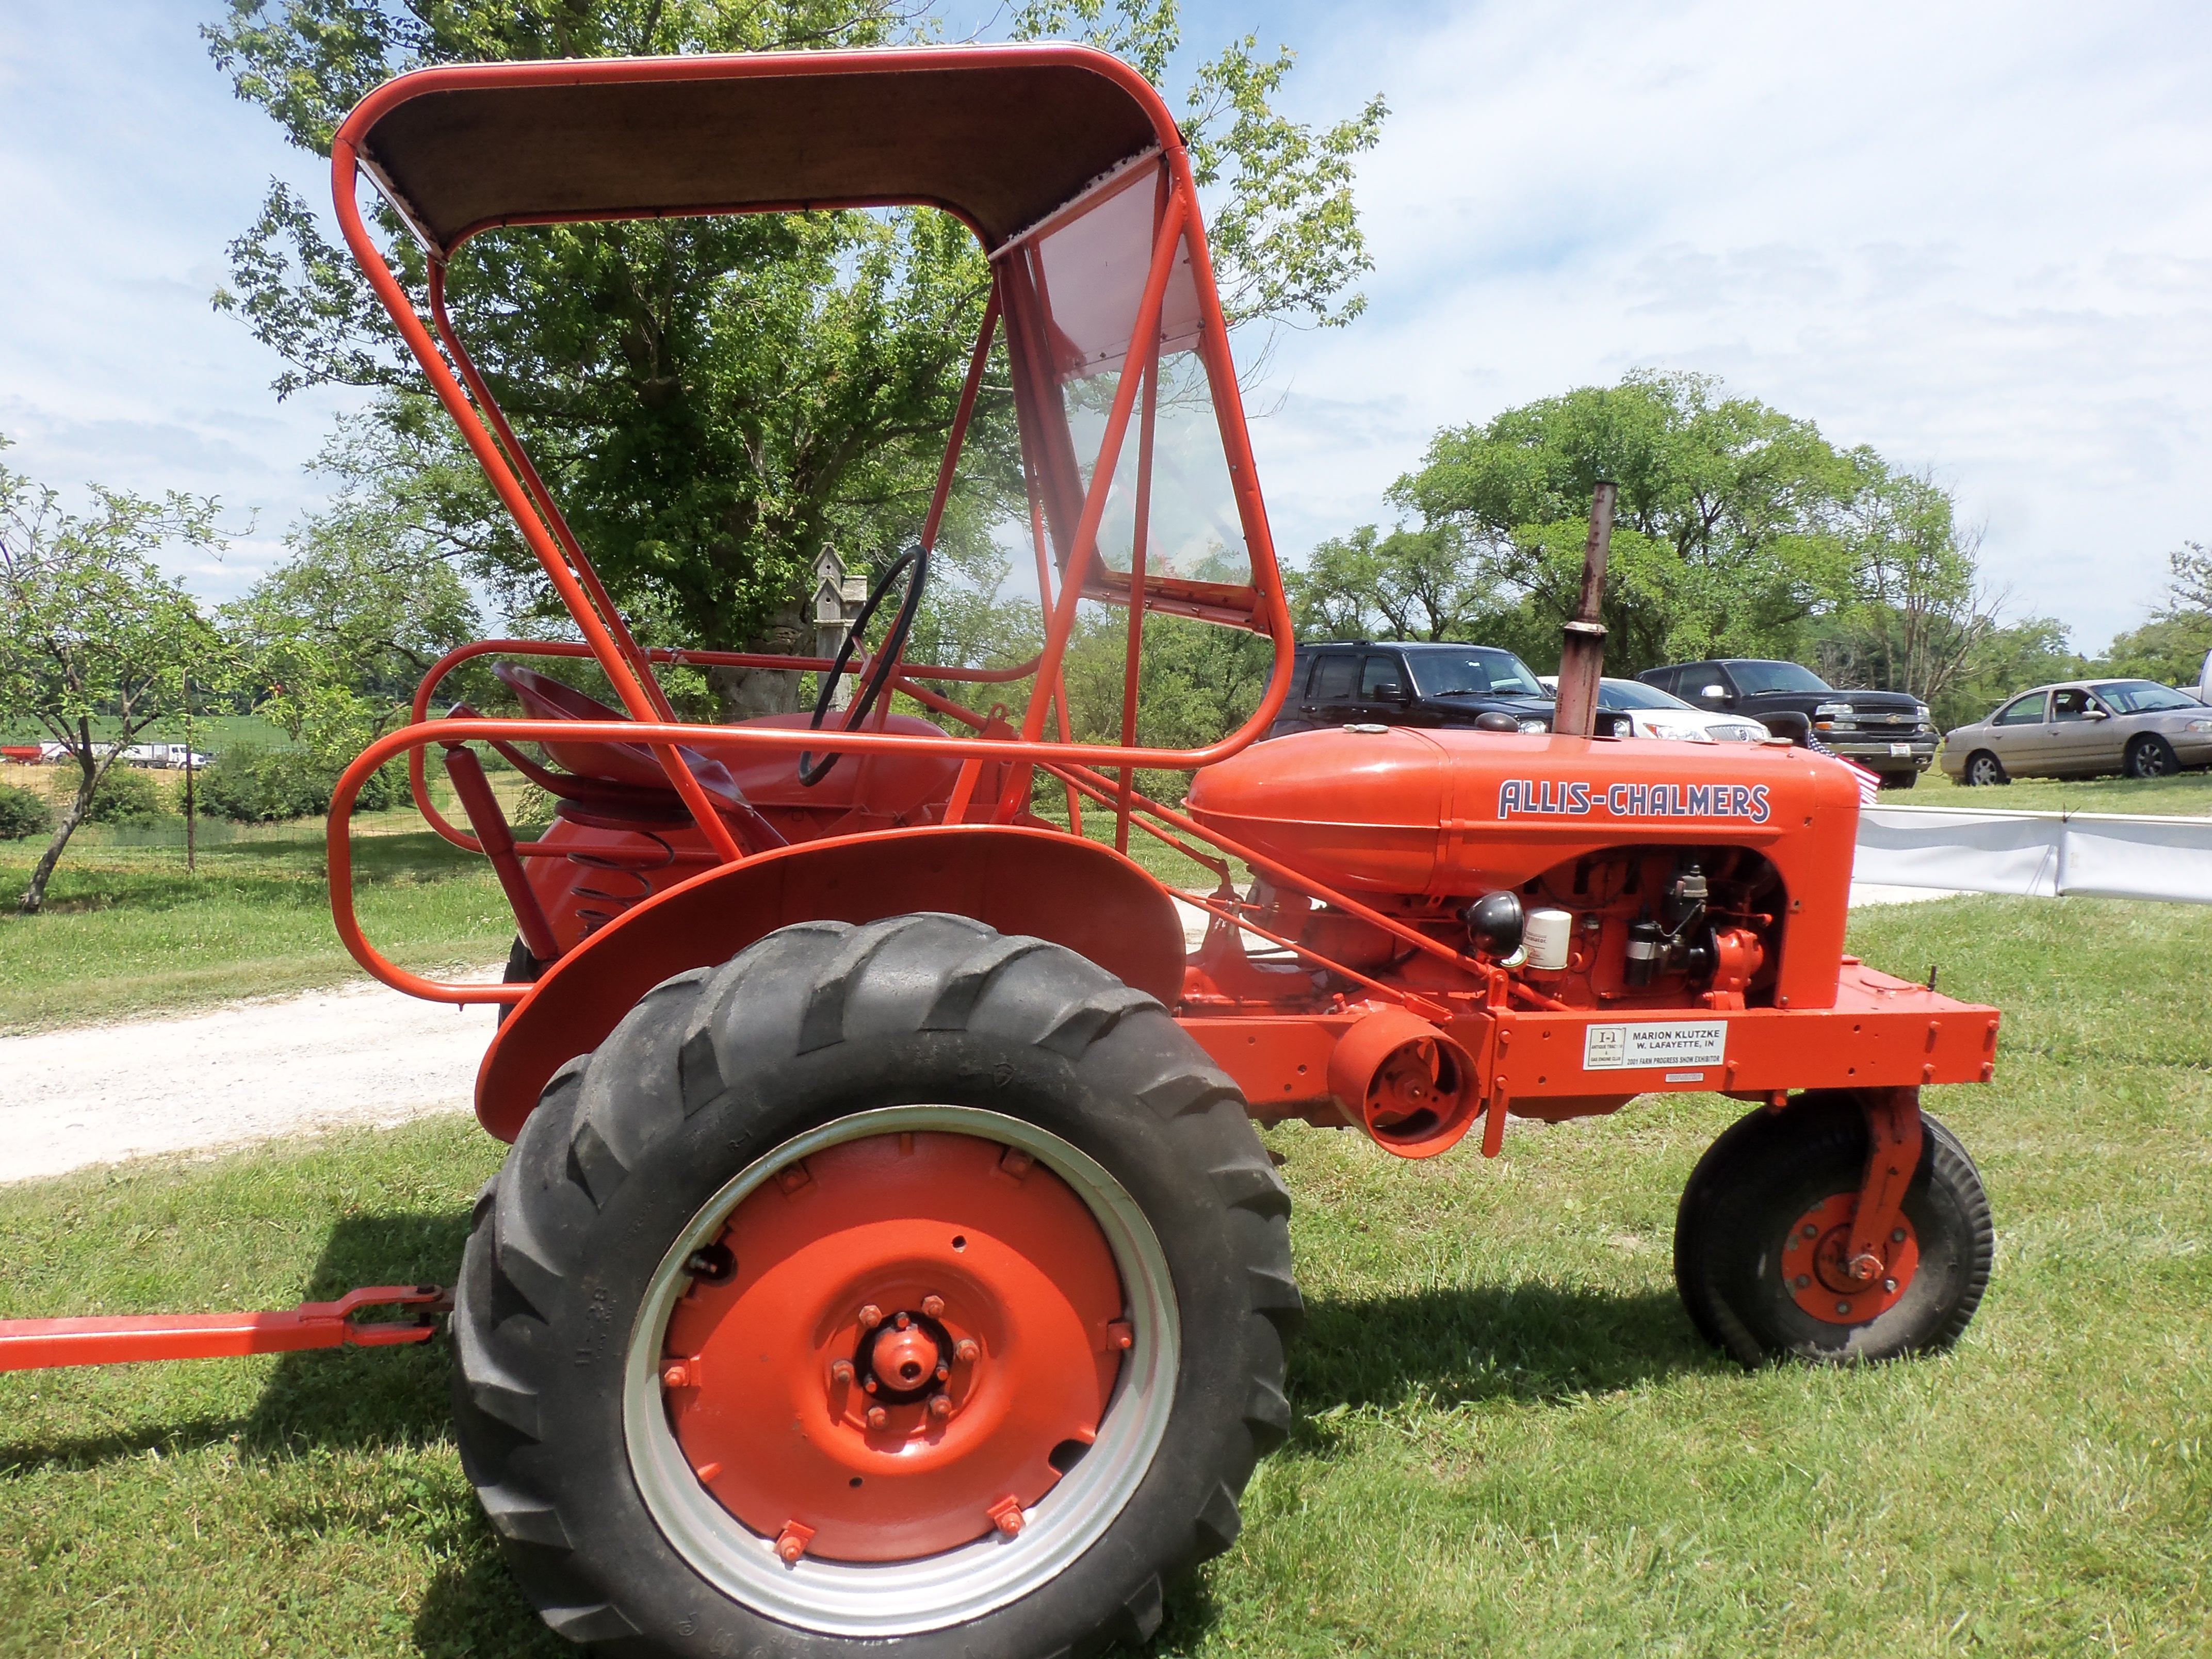 Allis Chalmers RC tractor with canopy | Allis-Chalmers | Pinterest ...